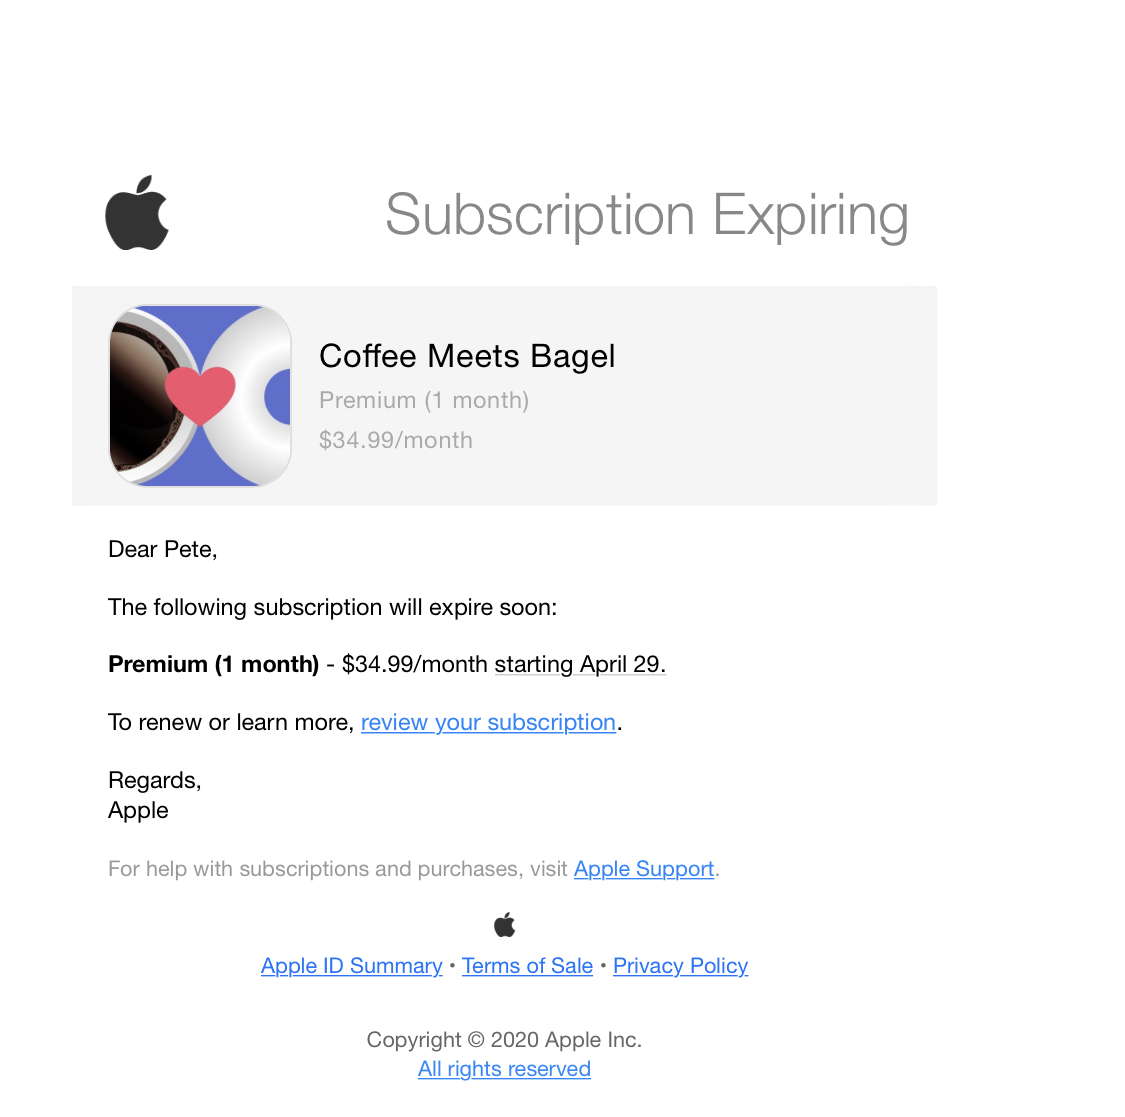 Can you delete messages on coffee meets bagel?